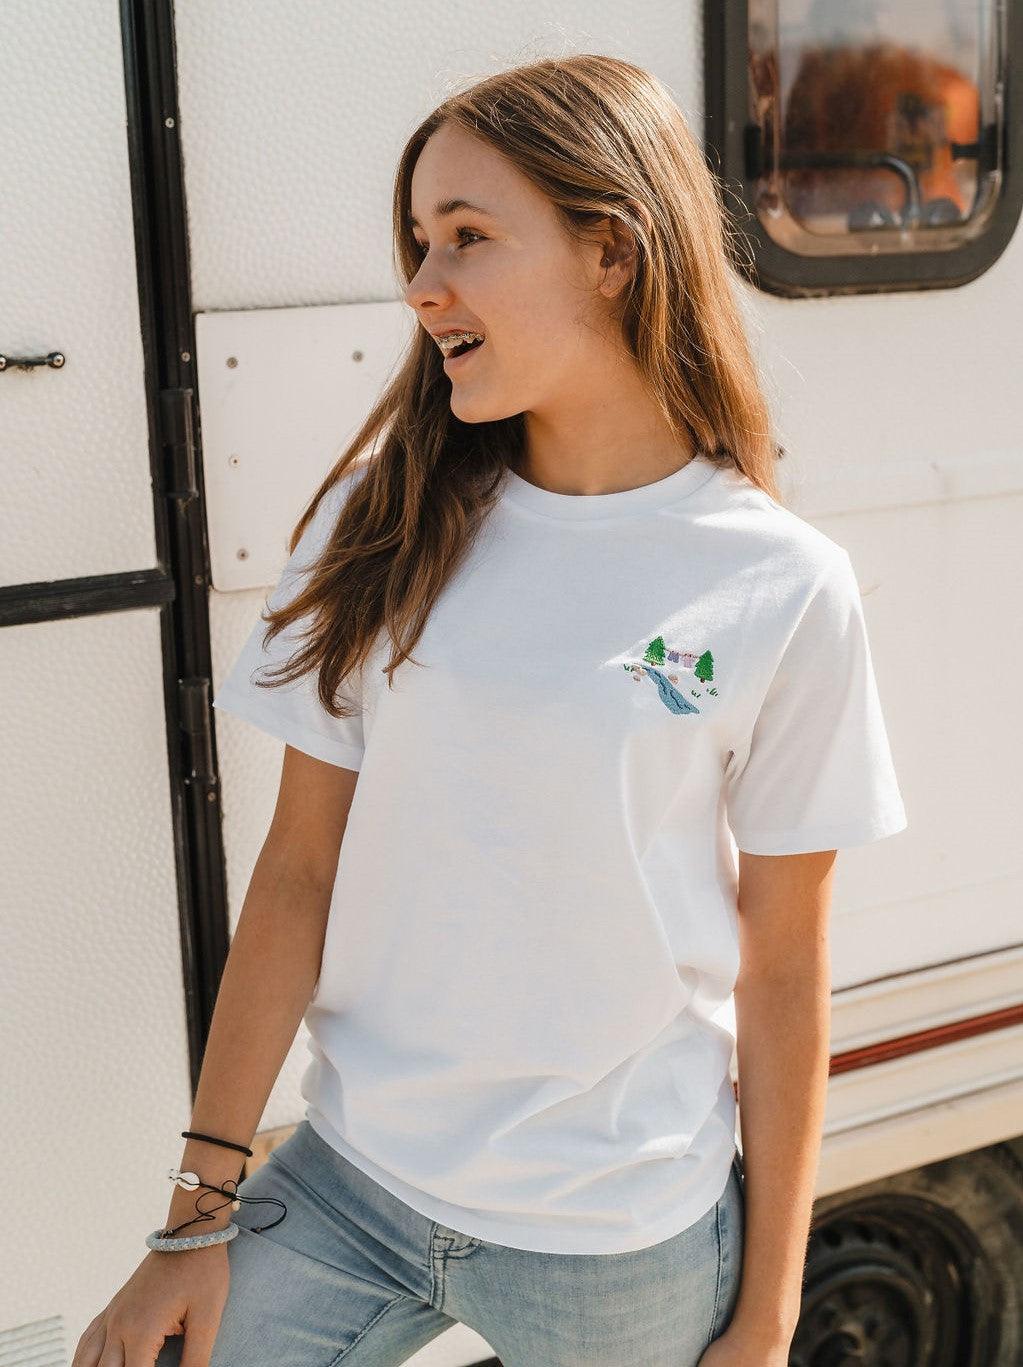 Teen 'Camping bliss' T-shirt - laundry day - white - Ridges And Steam